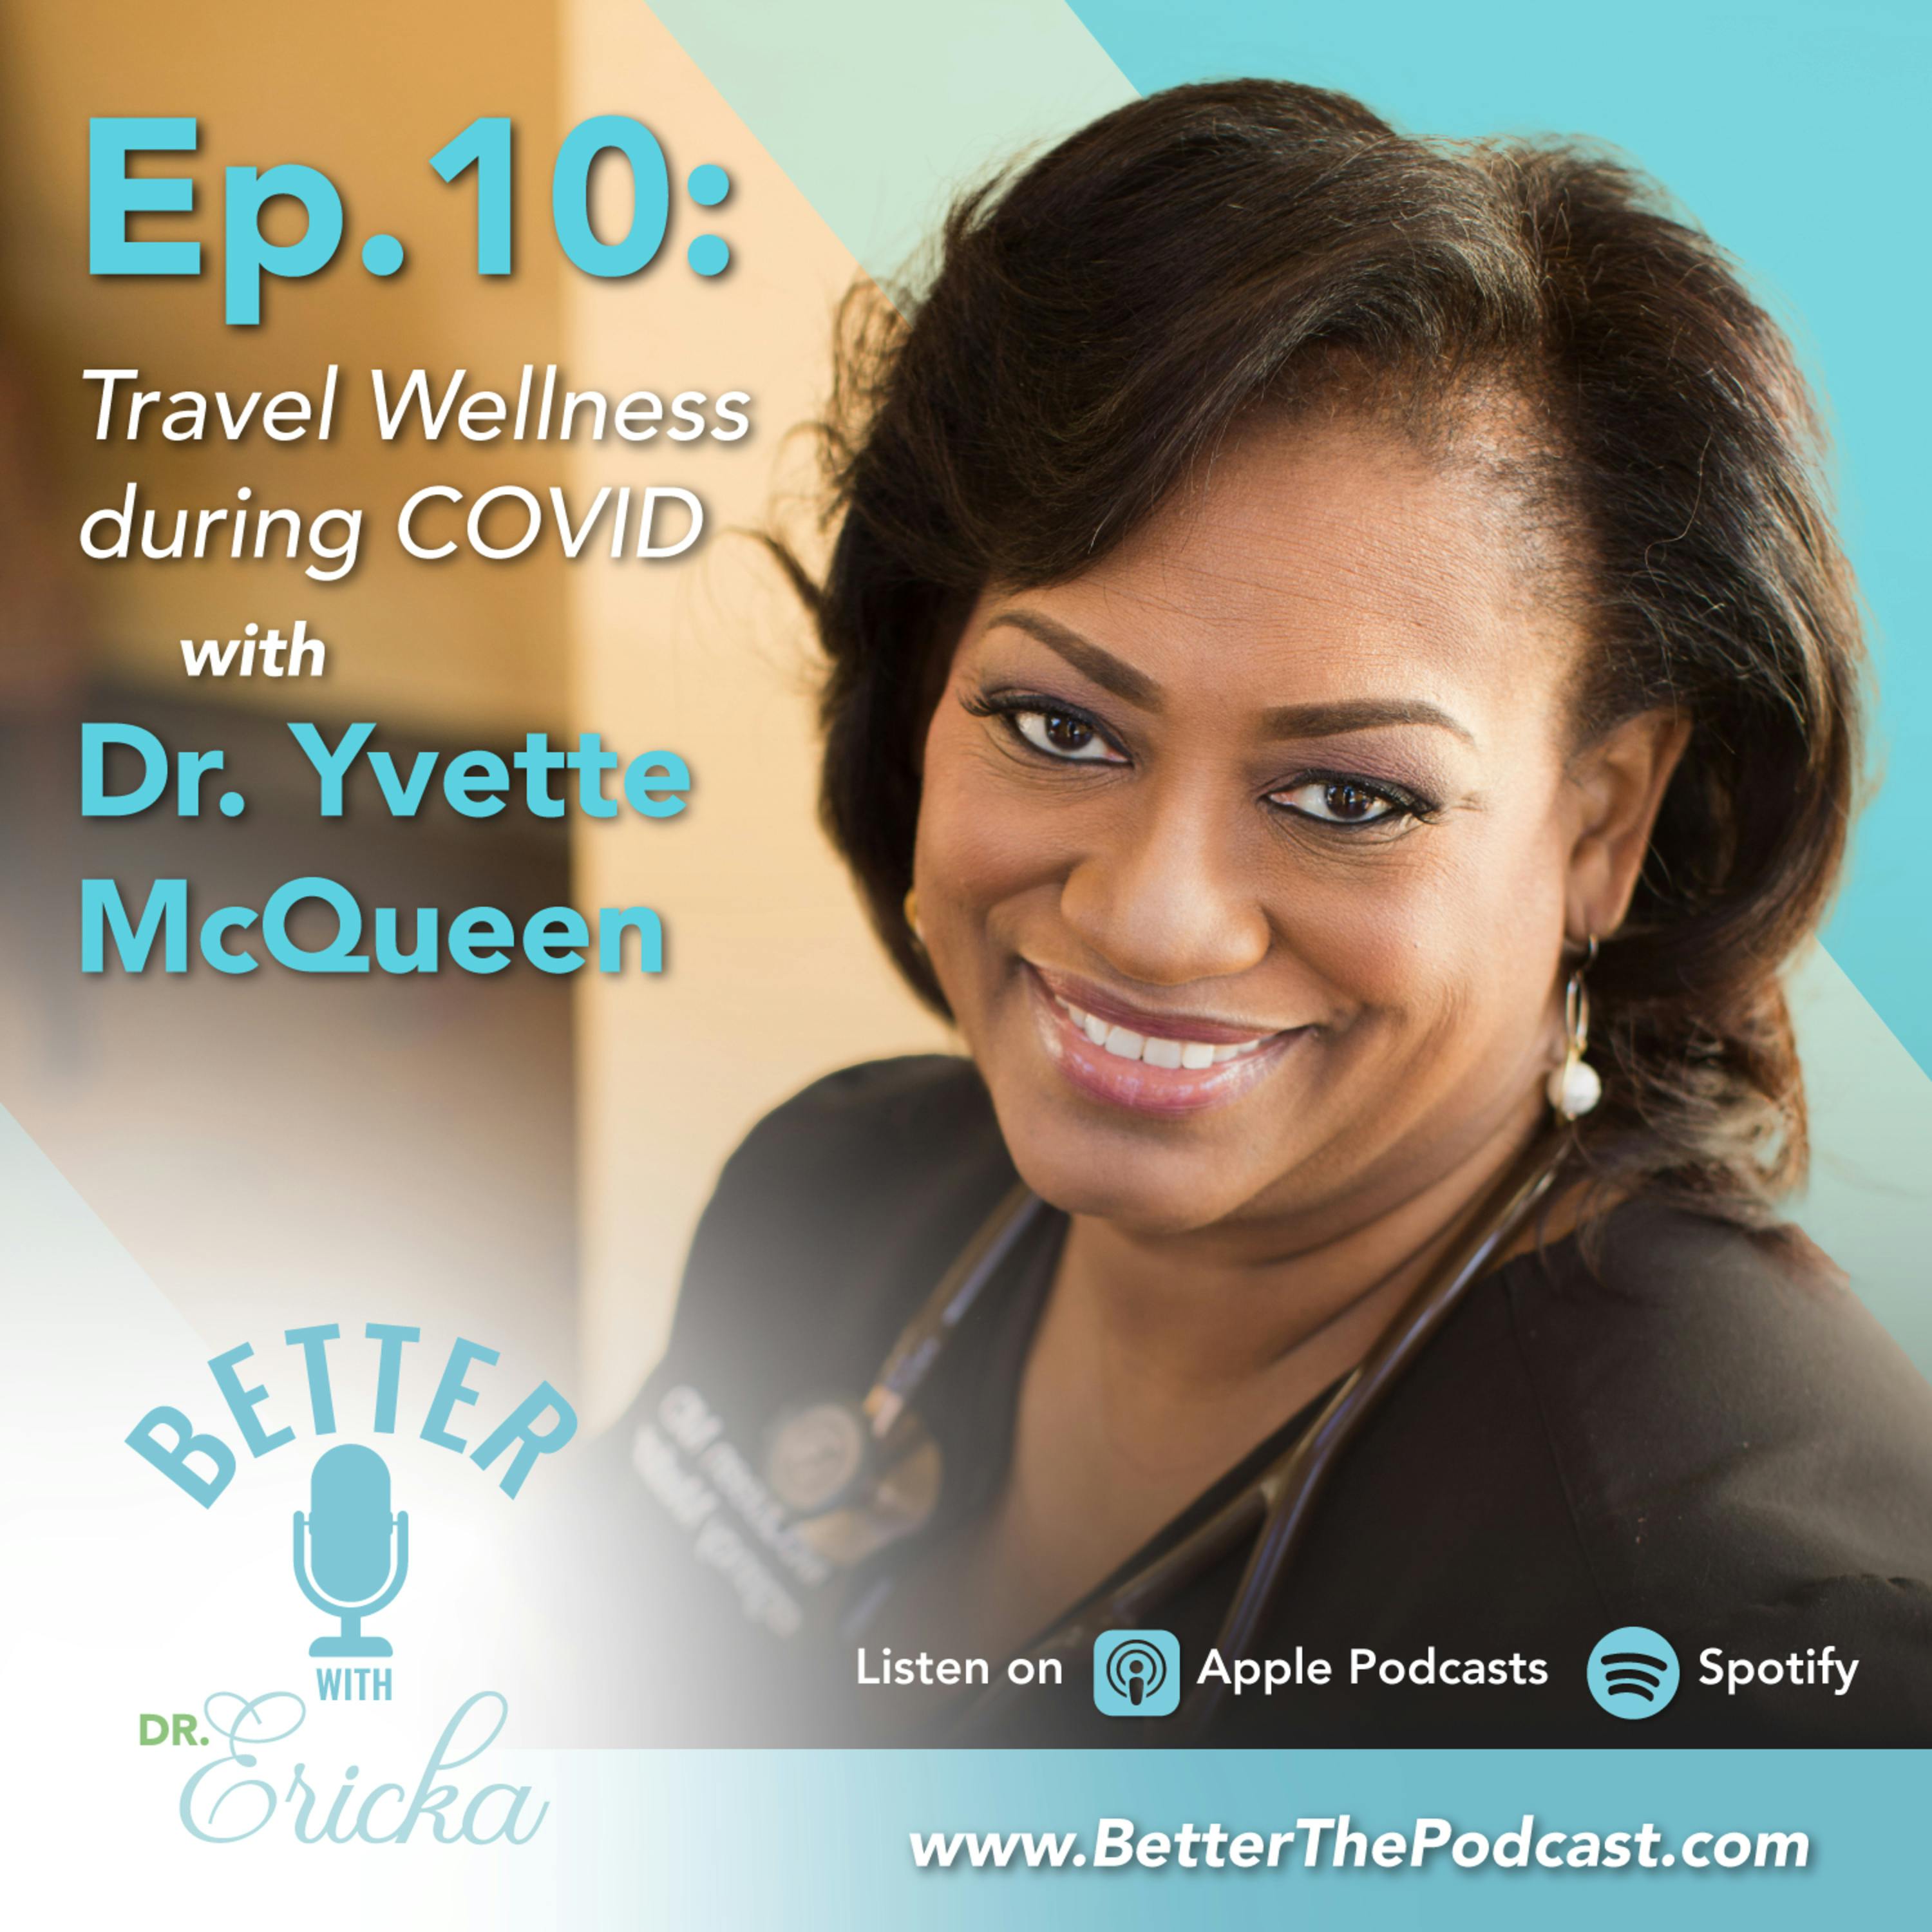 Travel Wellness During COVID with Dr. Yvette